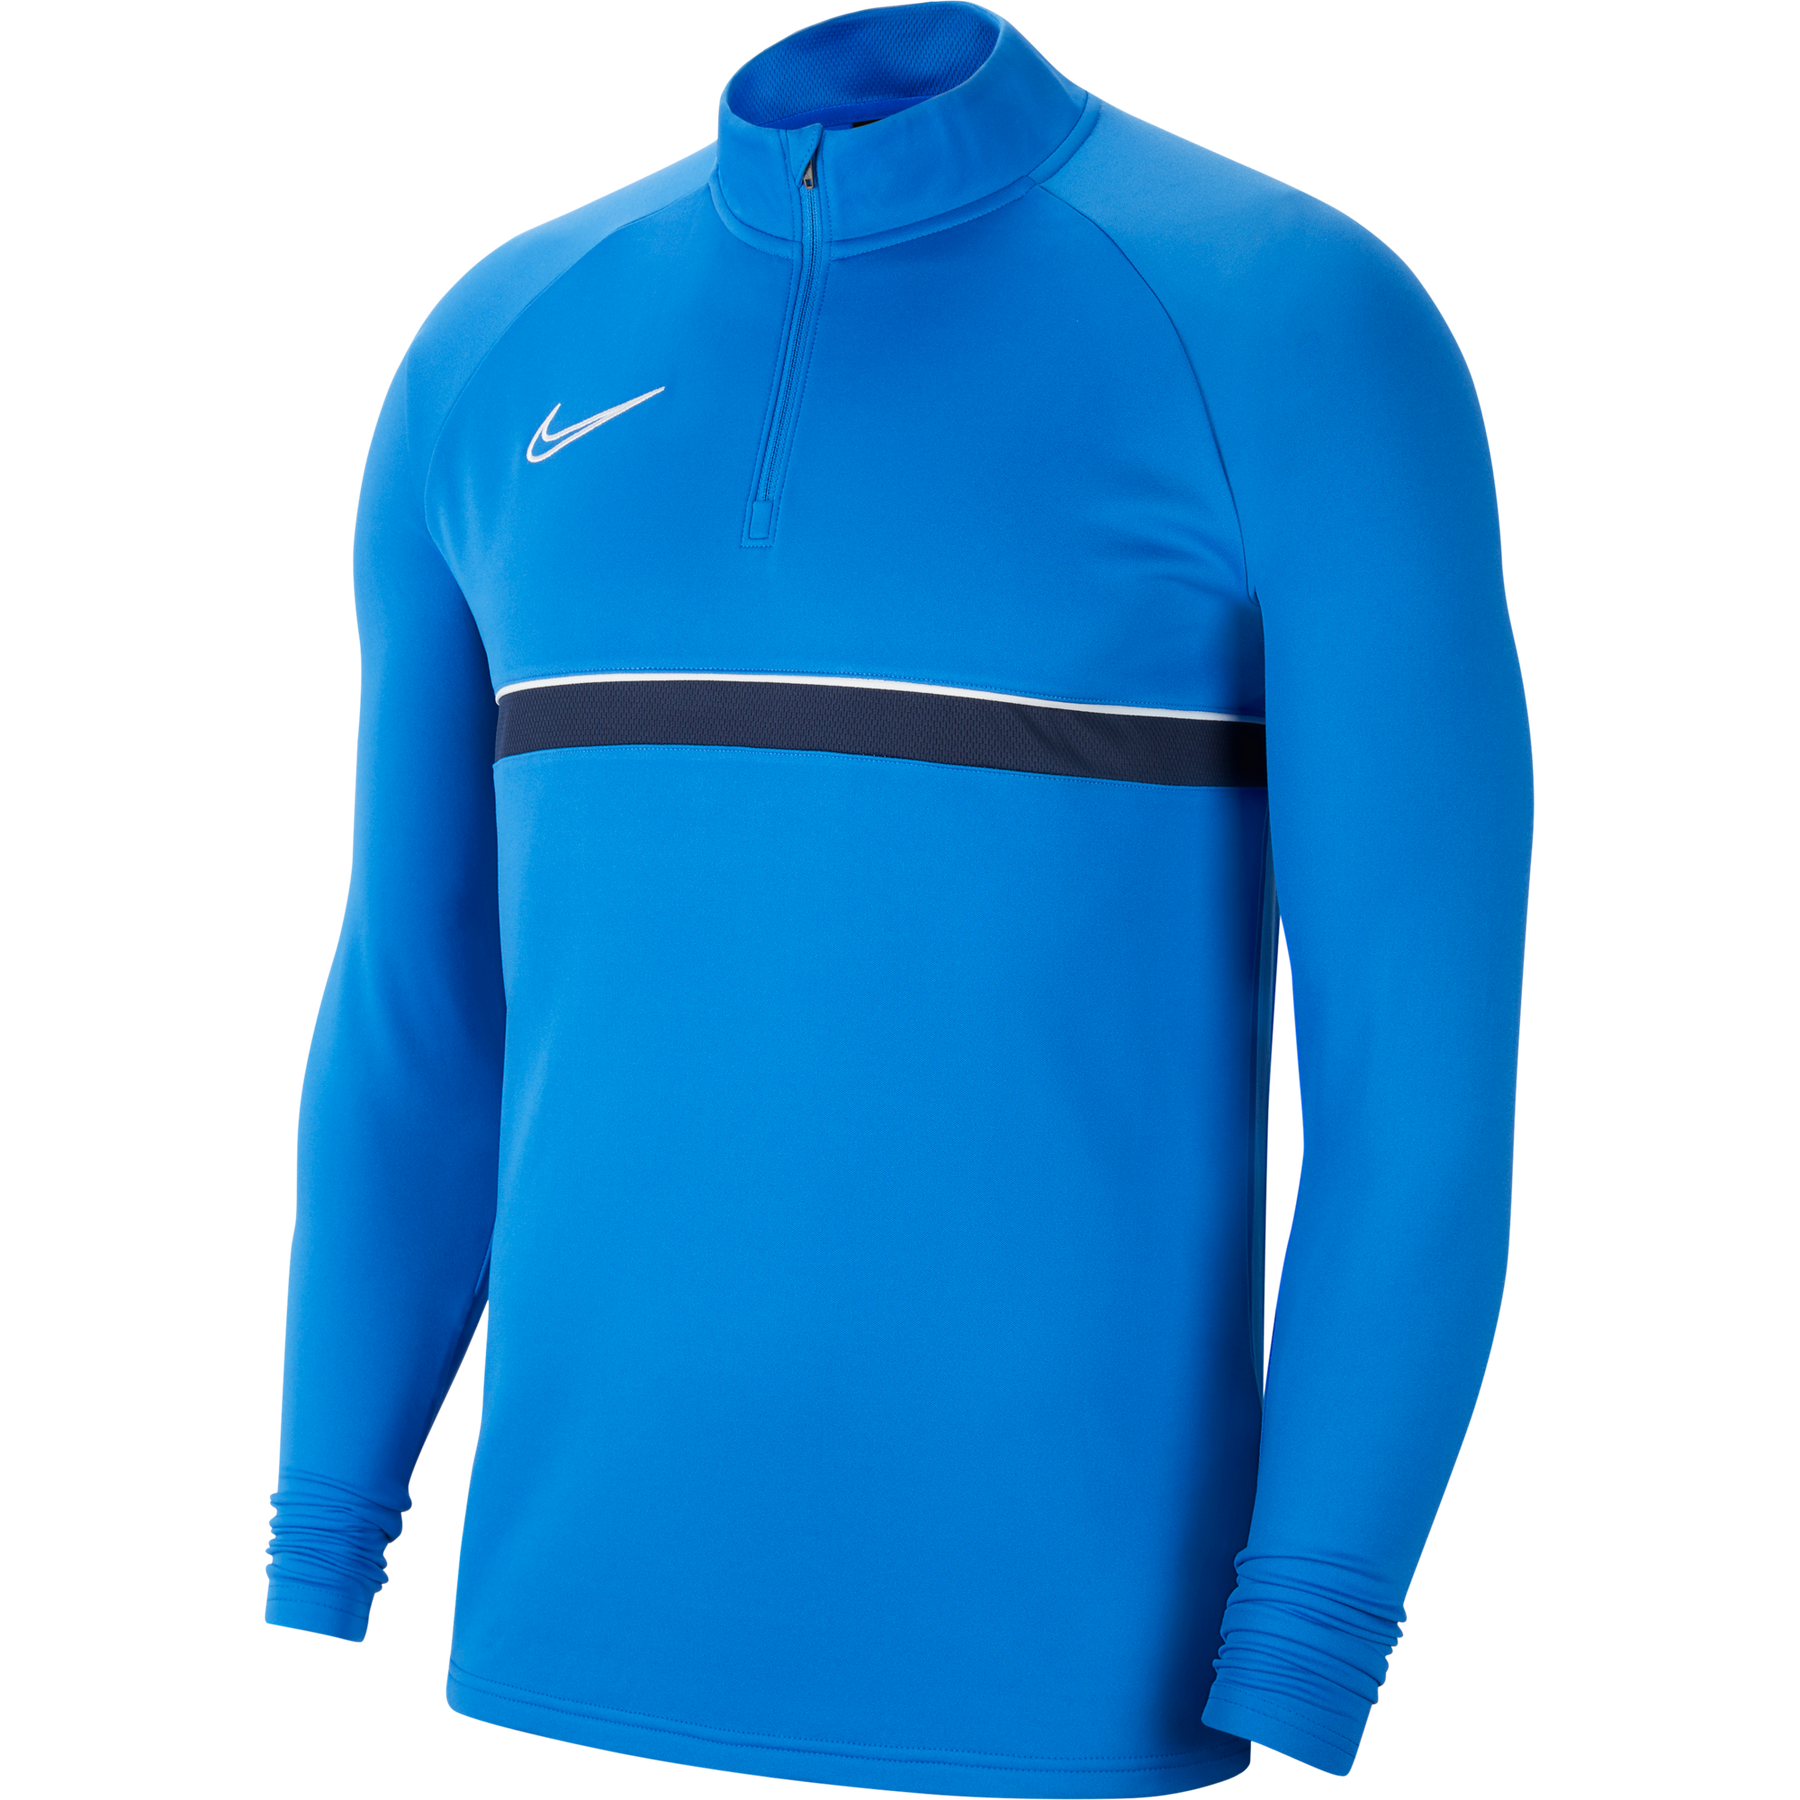 Nike Academy 21 Drill Top